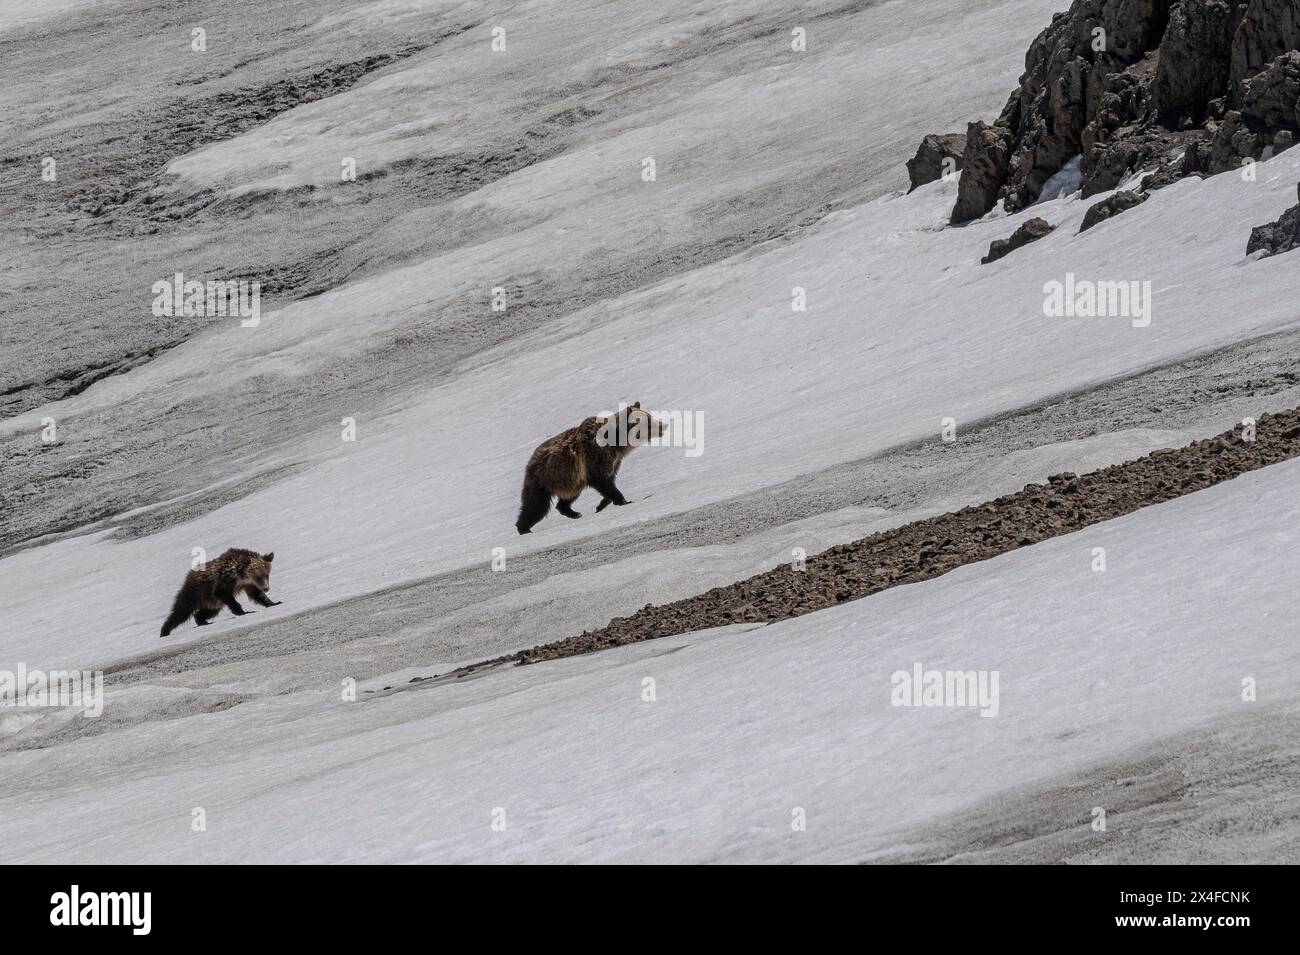 USA, Wyoming. Sow Grizzly Bear and Cub climb snowfield, Absaroka Mountains Stock Photo